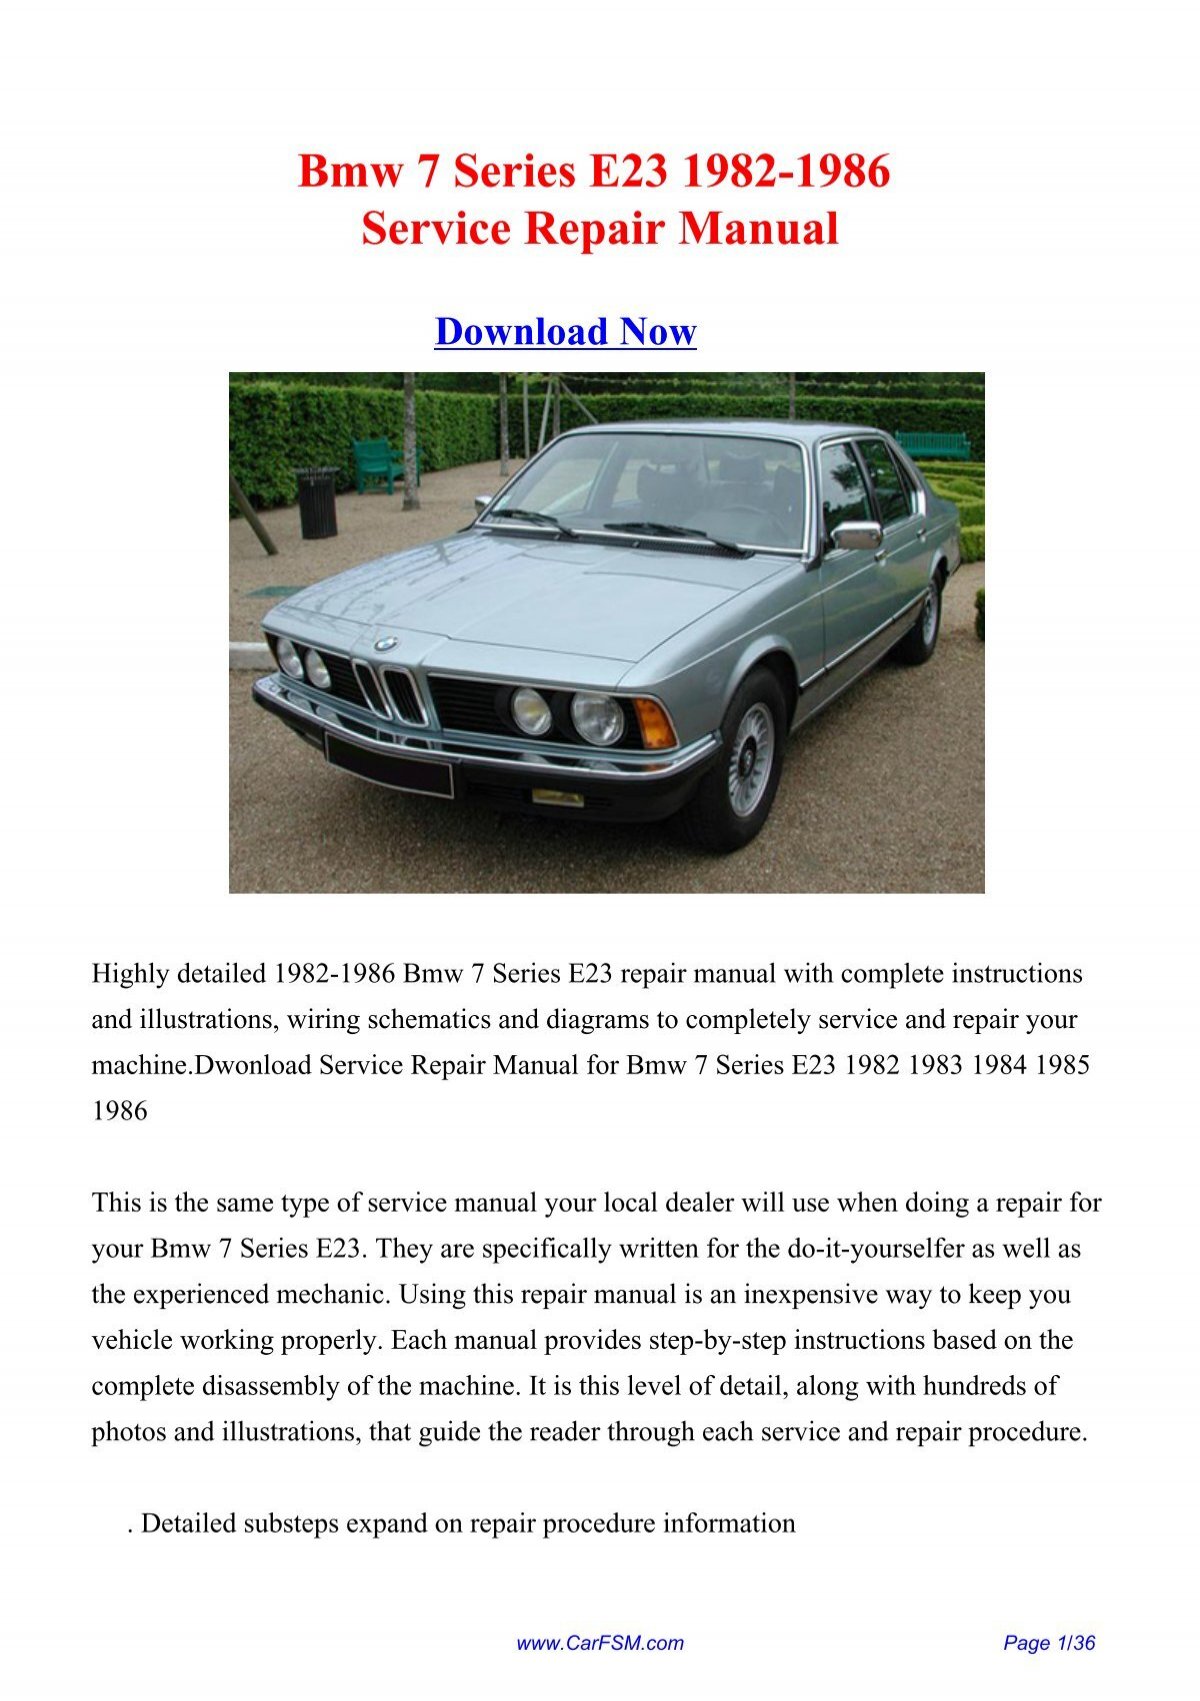 Bmw E23 Wiring Diagram Wiring Diagram Replace Clue Check Clue Check Miramontiseo It